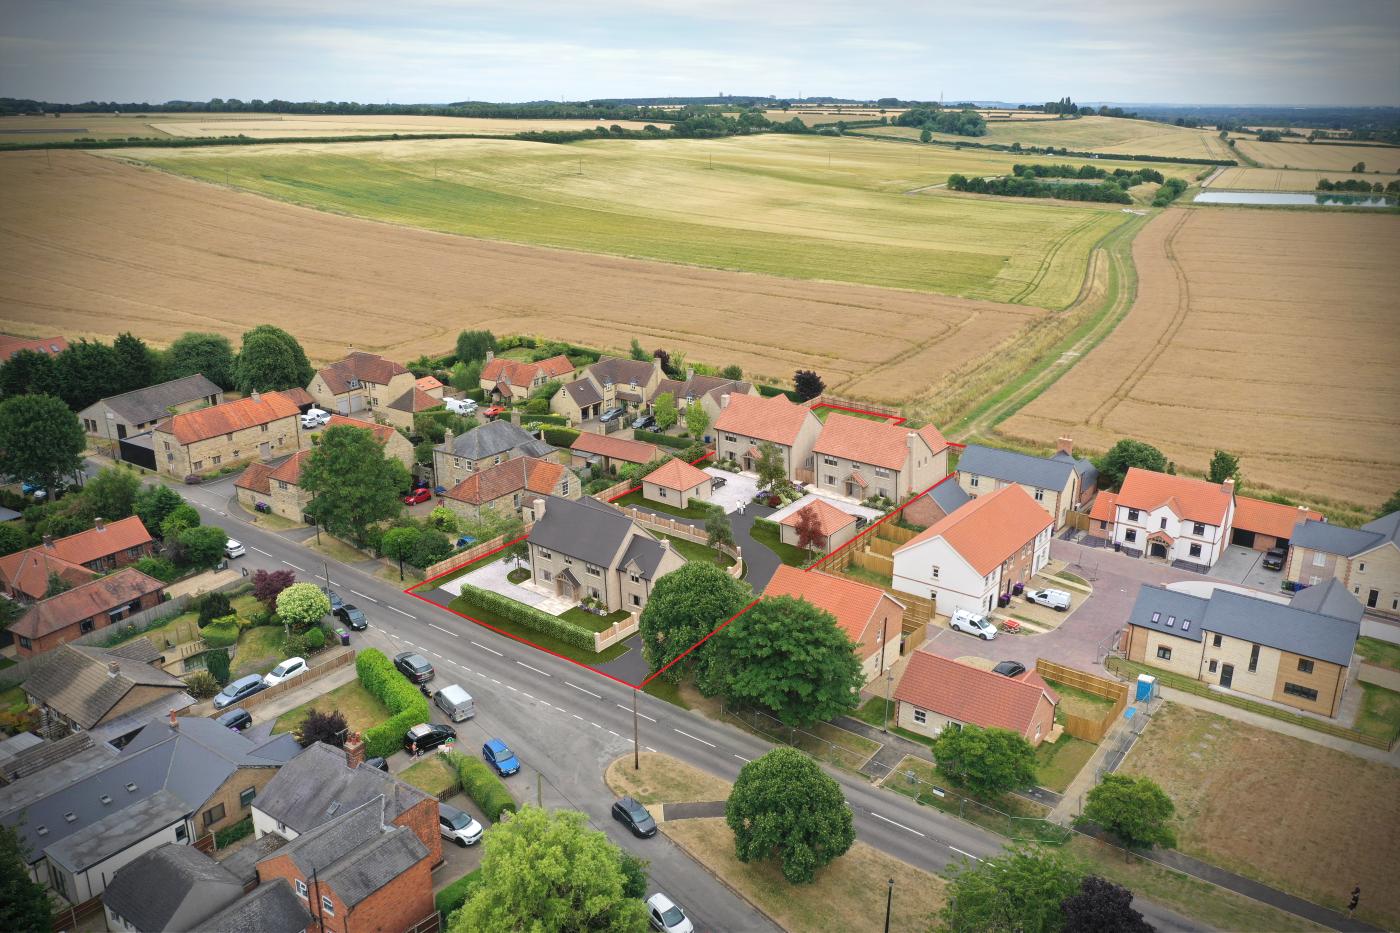 Plans submitted for new family homes in the village of Scampton near Lincoln.